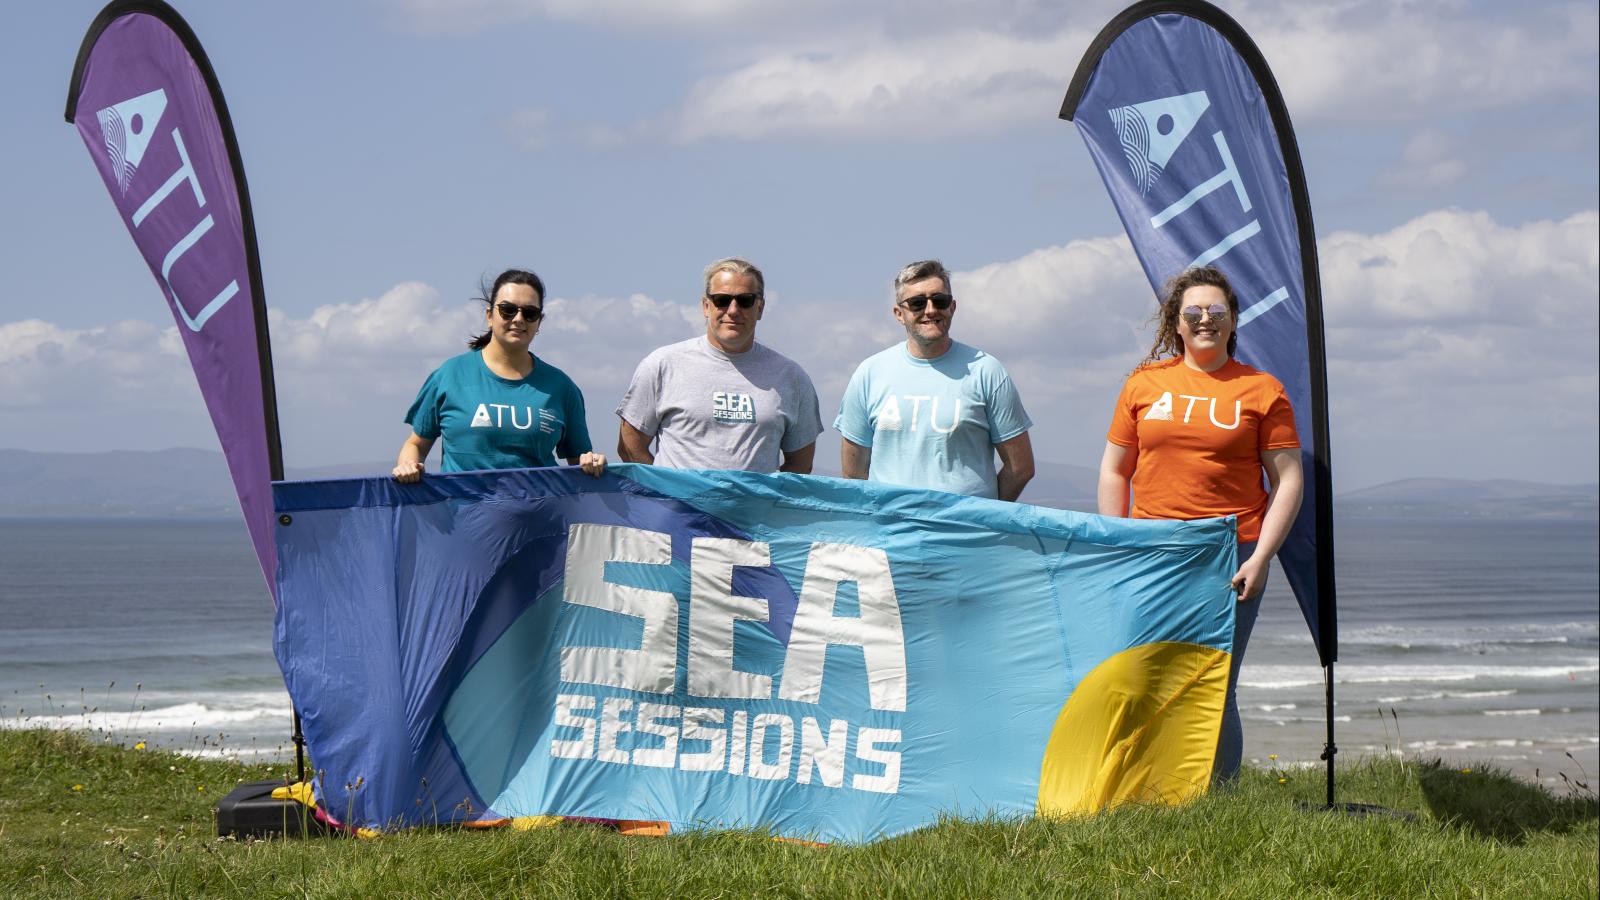 image of four people on beach with ATU and Sea Sessions flags